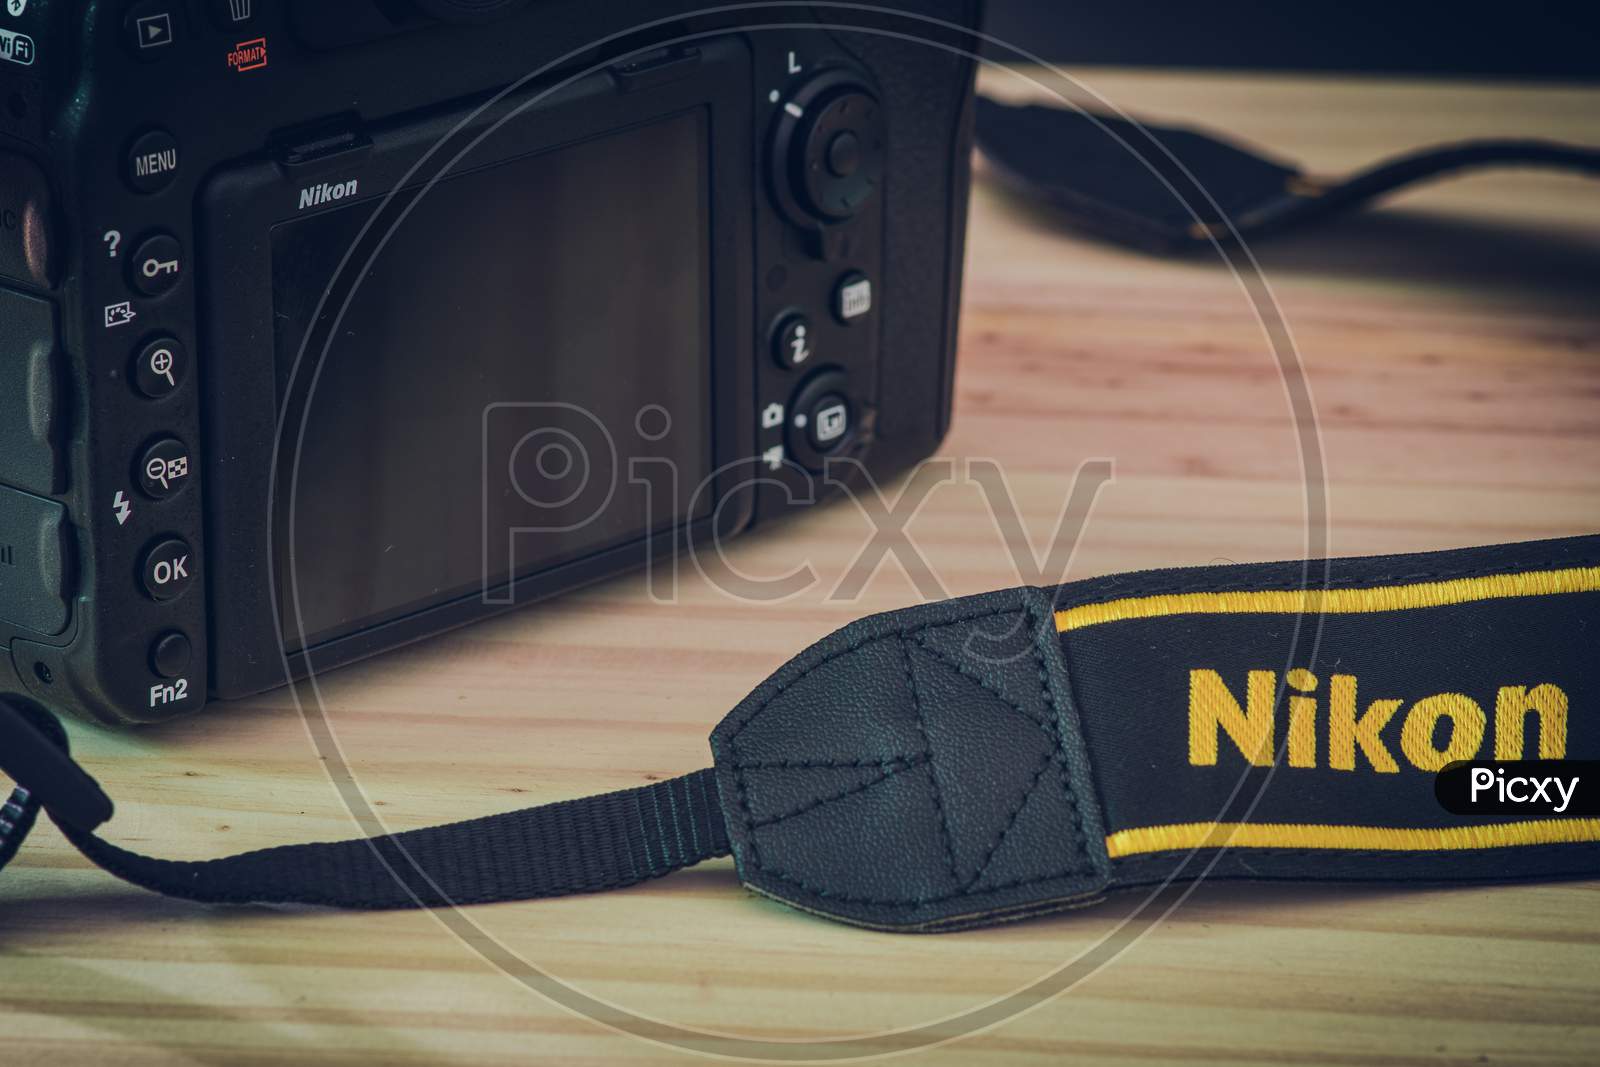 Sri Lanka - 02 17 2021: Modern Professional Level Dslr Body And Neck Trap With Nikon Brand Name Embraided On A Wooden Table, Nikon D850 Close Up Photograph.